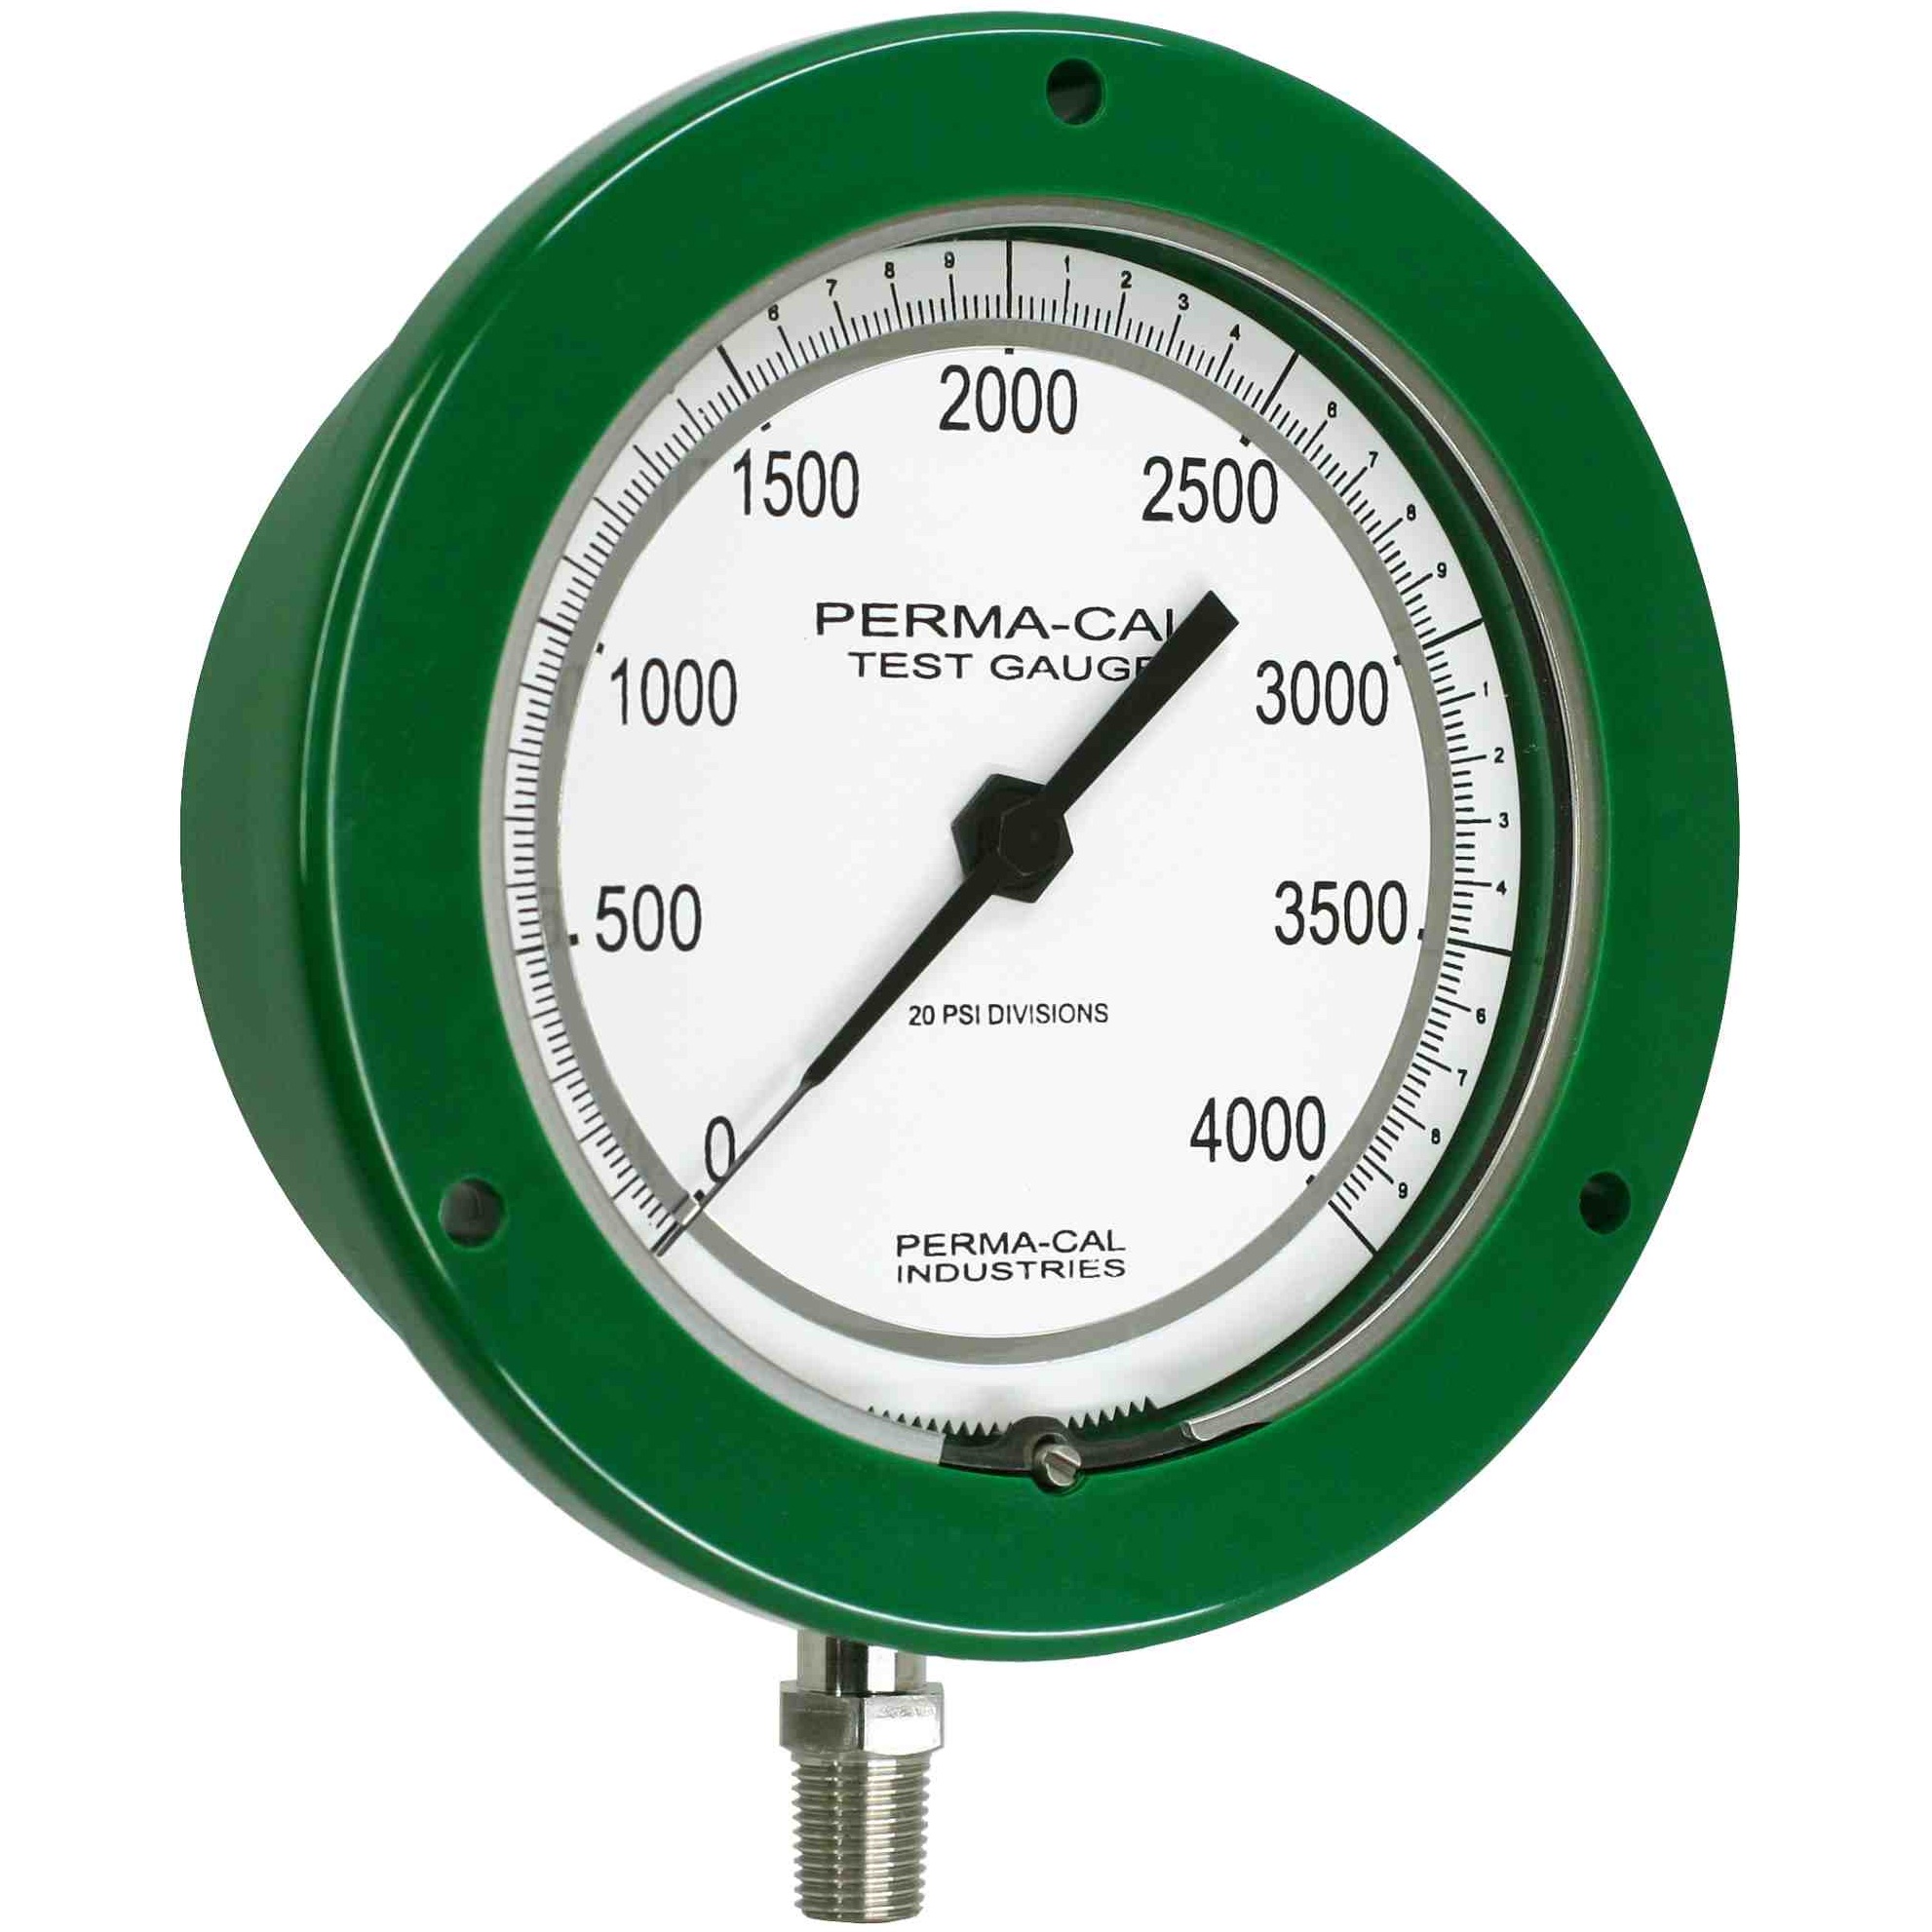 Details about   PERMA-CAL 11ONIB33A21 PROCESS GAUGE USED * 